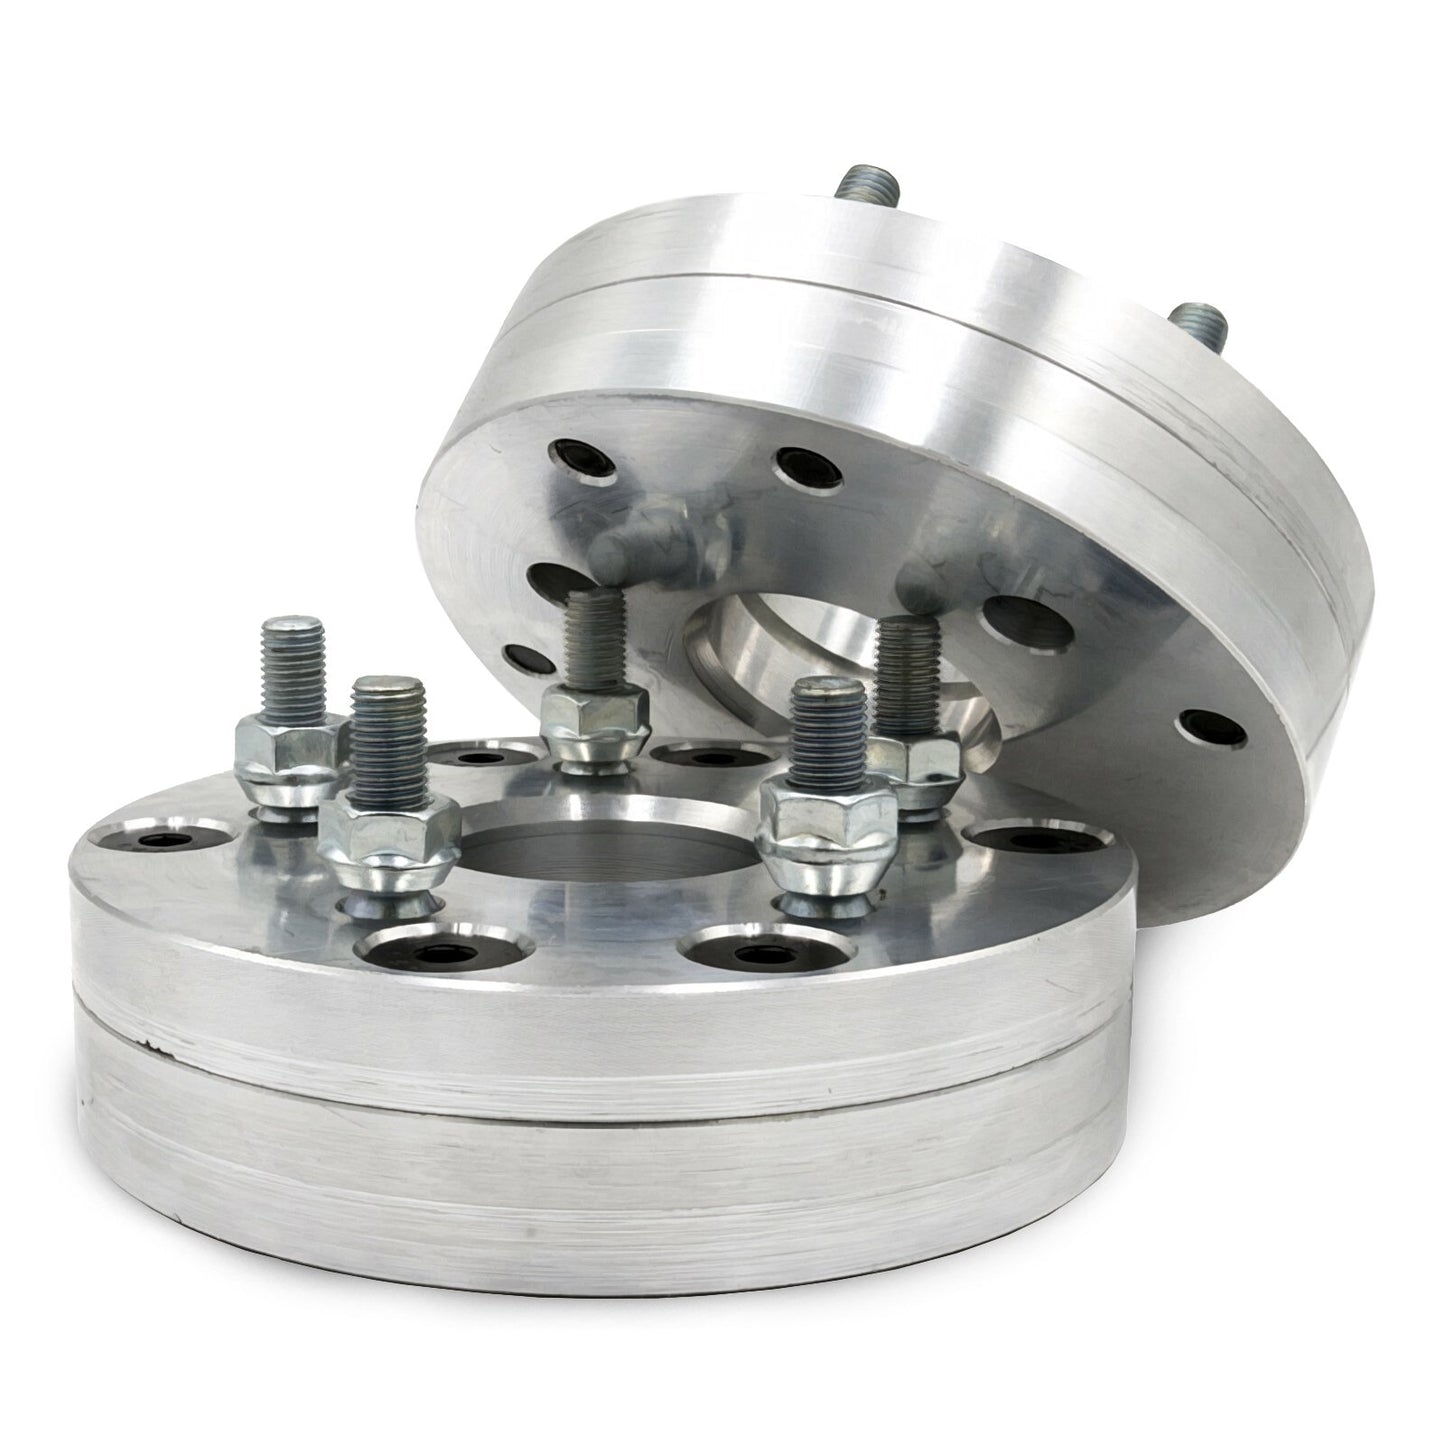 4x110 to 5x112 2 piece Wheel Adapter - Thickness: 1.5" - 3"